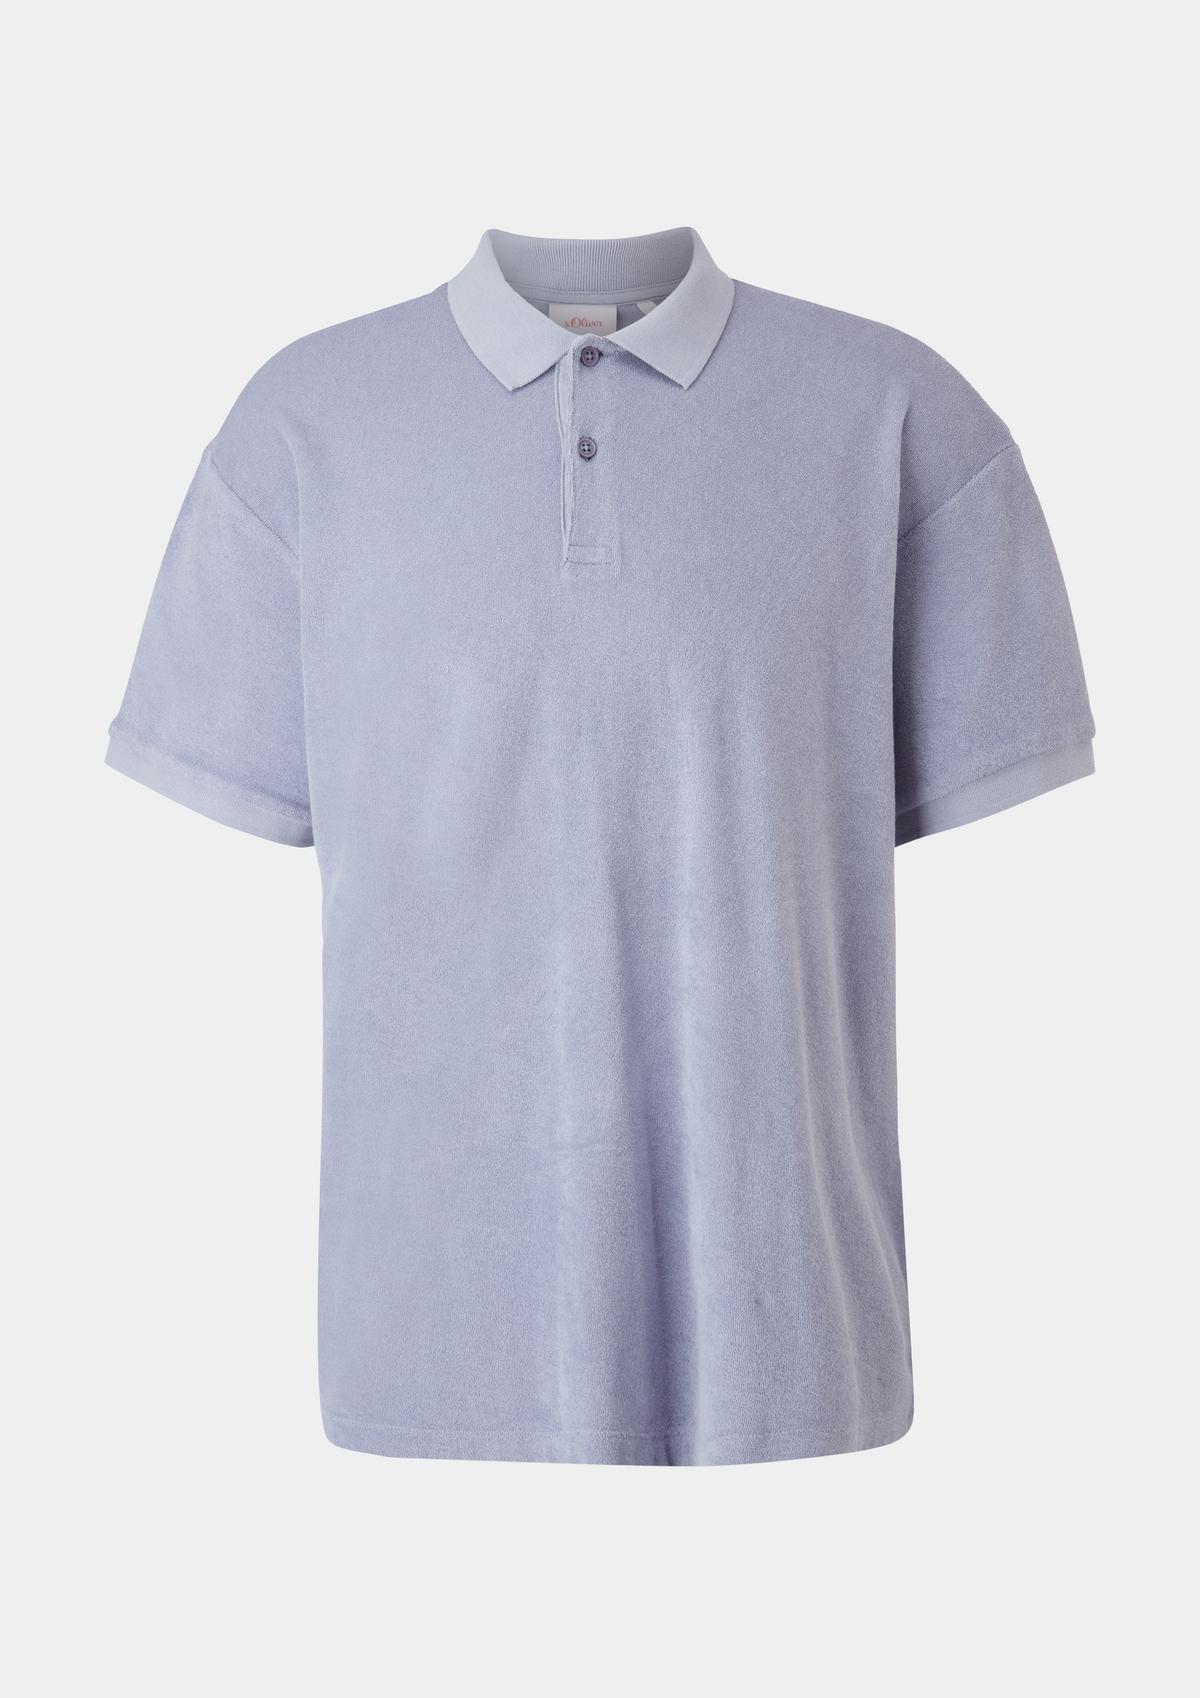 s.Oliver Polo shirt made of terrycloth fabric